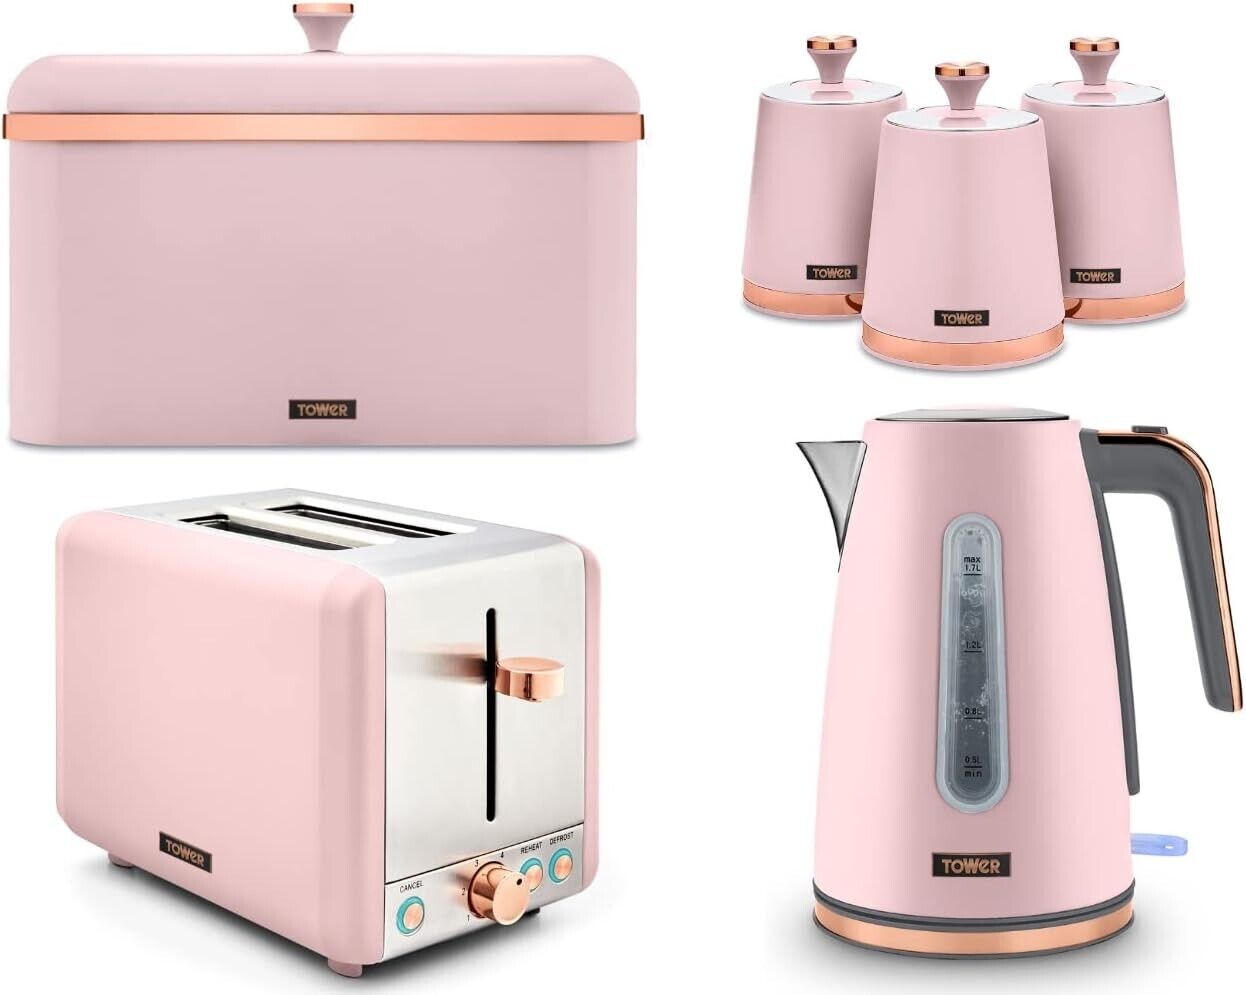 Tower Cavaletto Pink 1.7L 3KW Jug Kettle, 2 Slice Toaster, Bread Bin & Canisters Matching KItchen Set